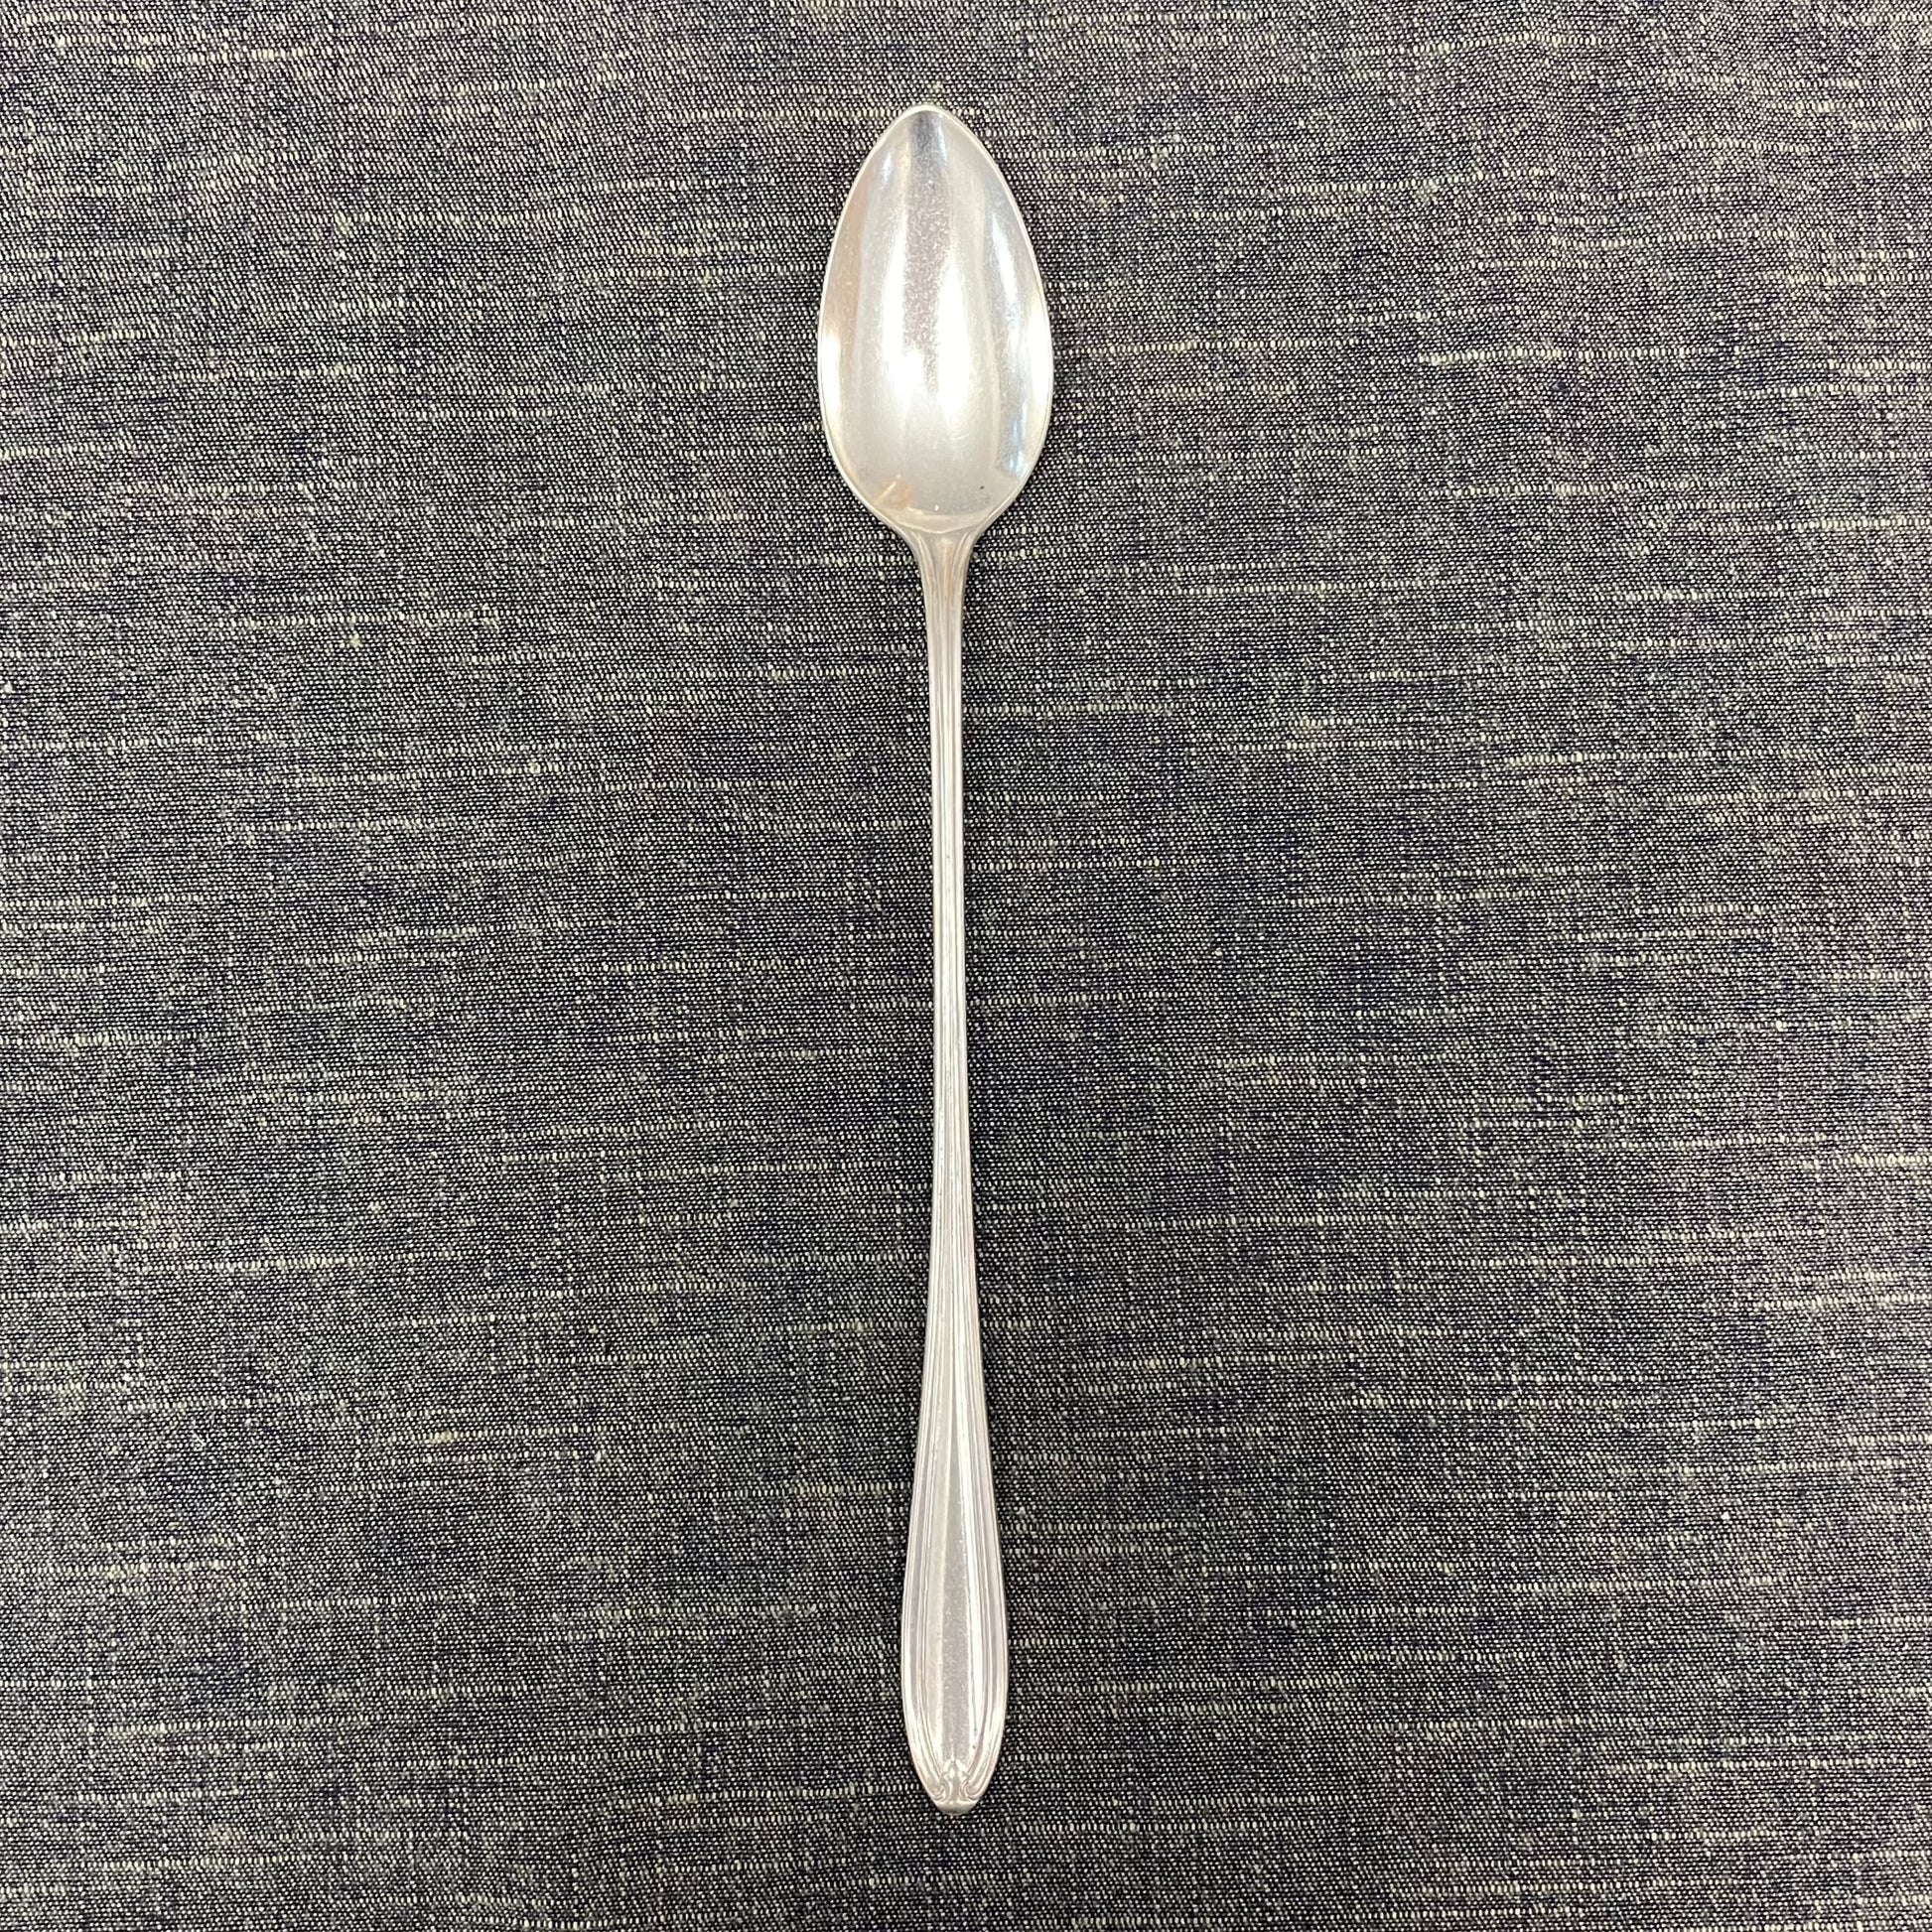 antique silver long handled teaspoon for serving jam or prop photography